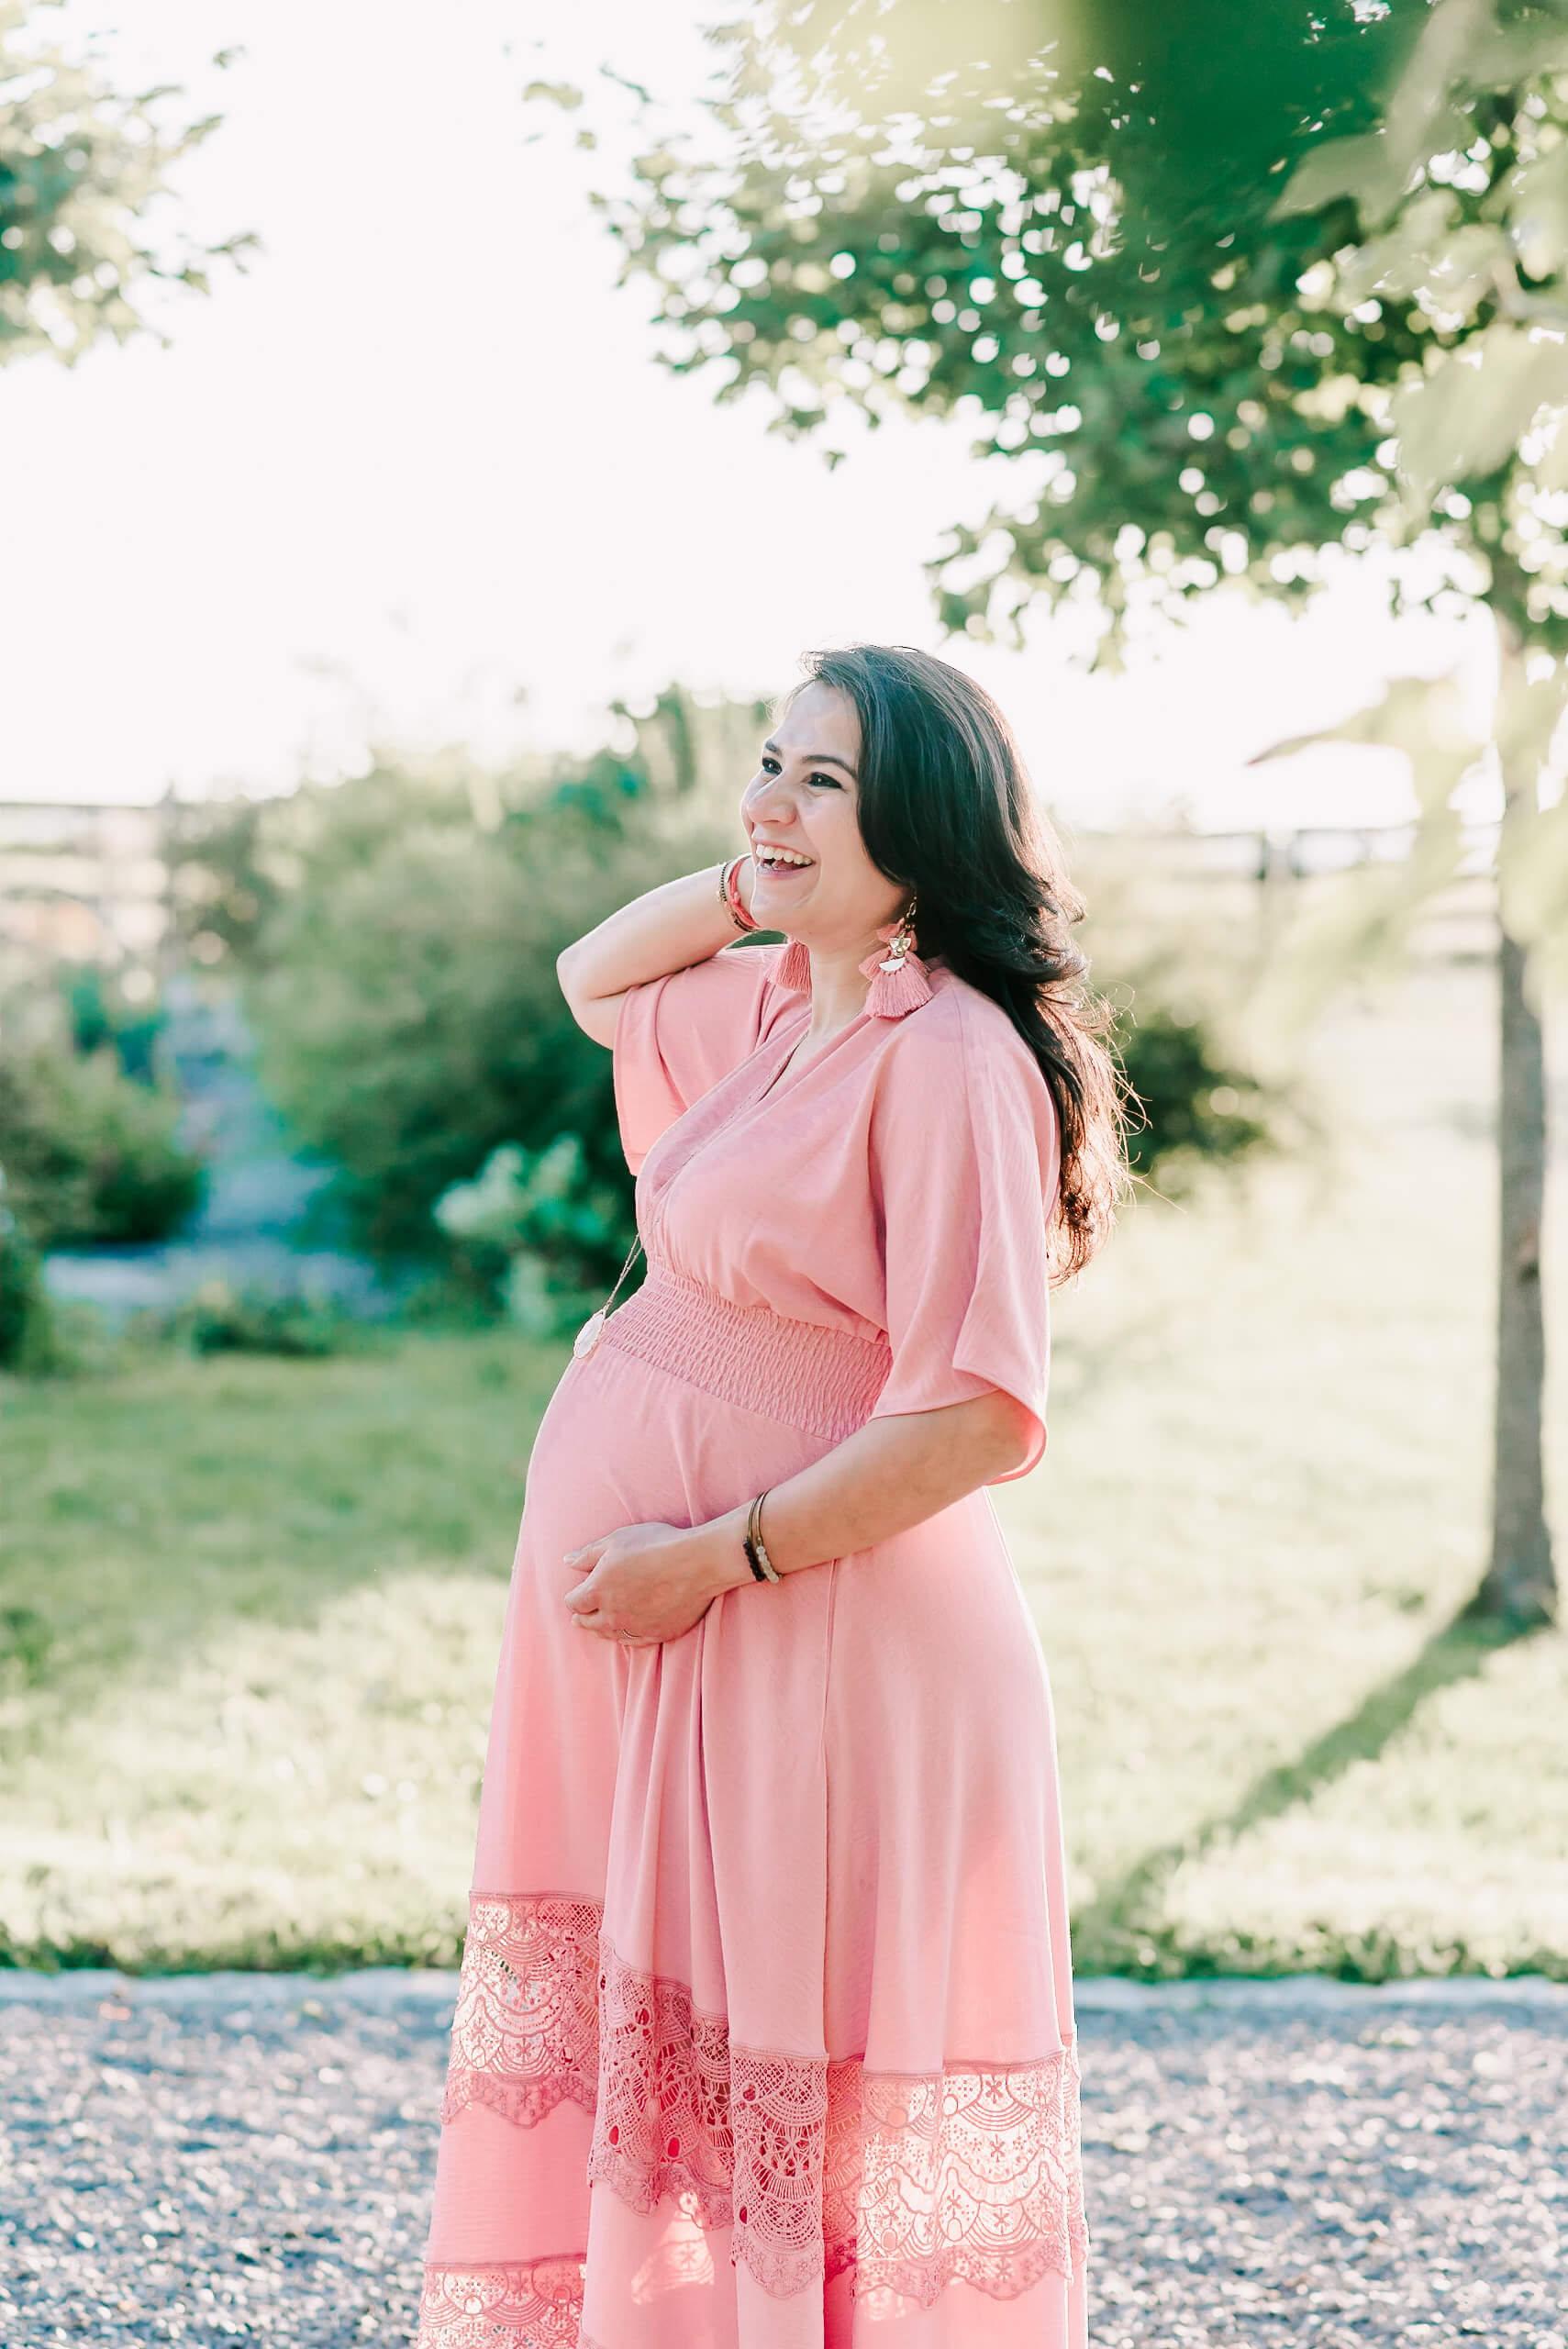 A mother to be stands in a park path in a pink maternity dress with a hand pulling some hair back and smiling before visiting virginia hospital center arlington